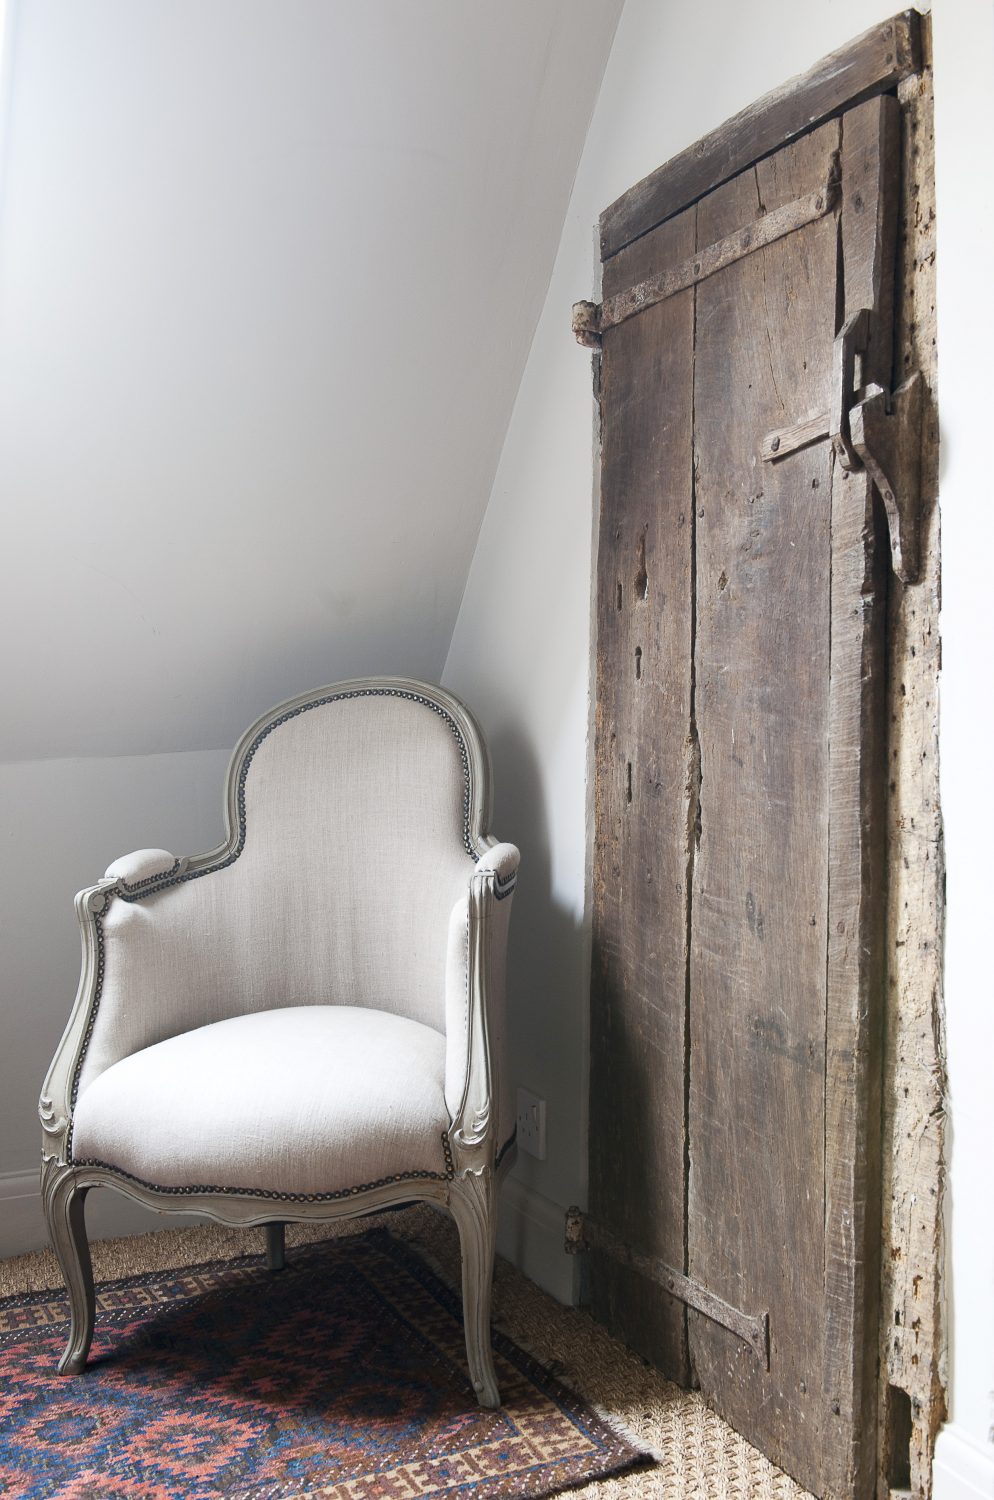 At the top of a small flight of steps on the landing, an old timber ‘hobbit door’ hints at the house’s long history